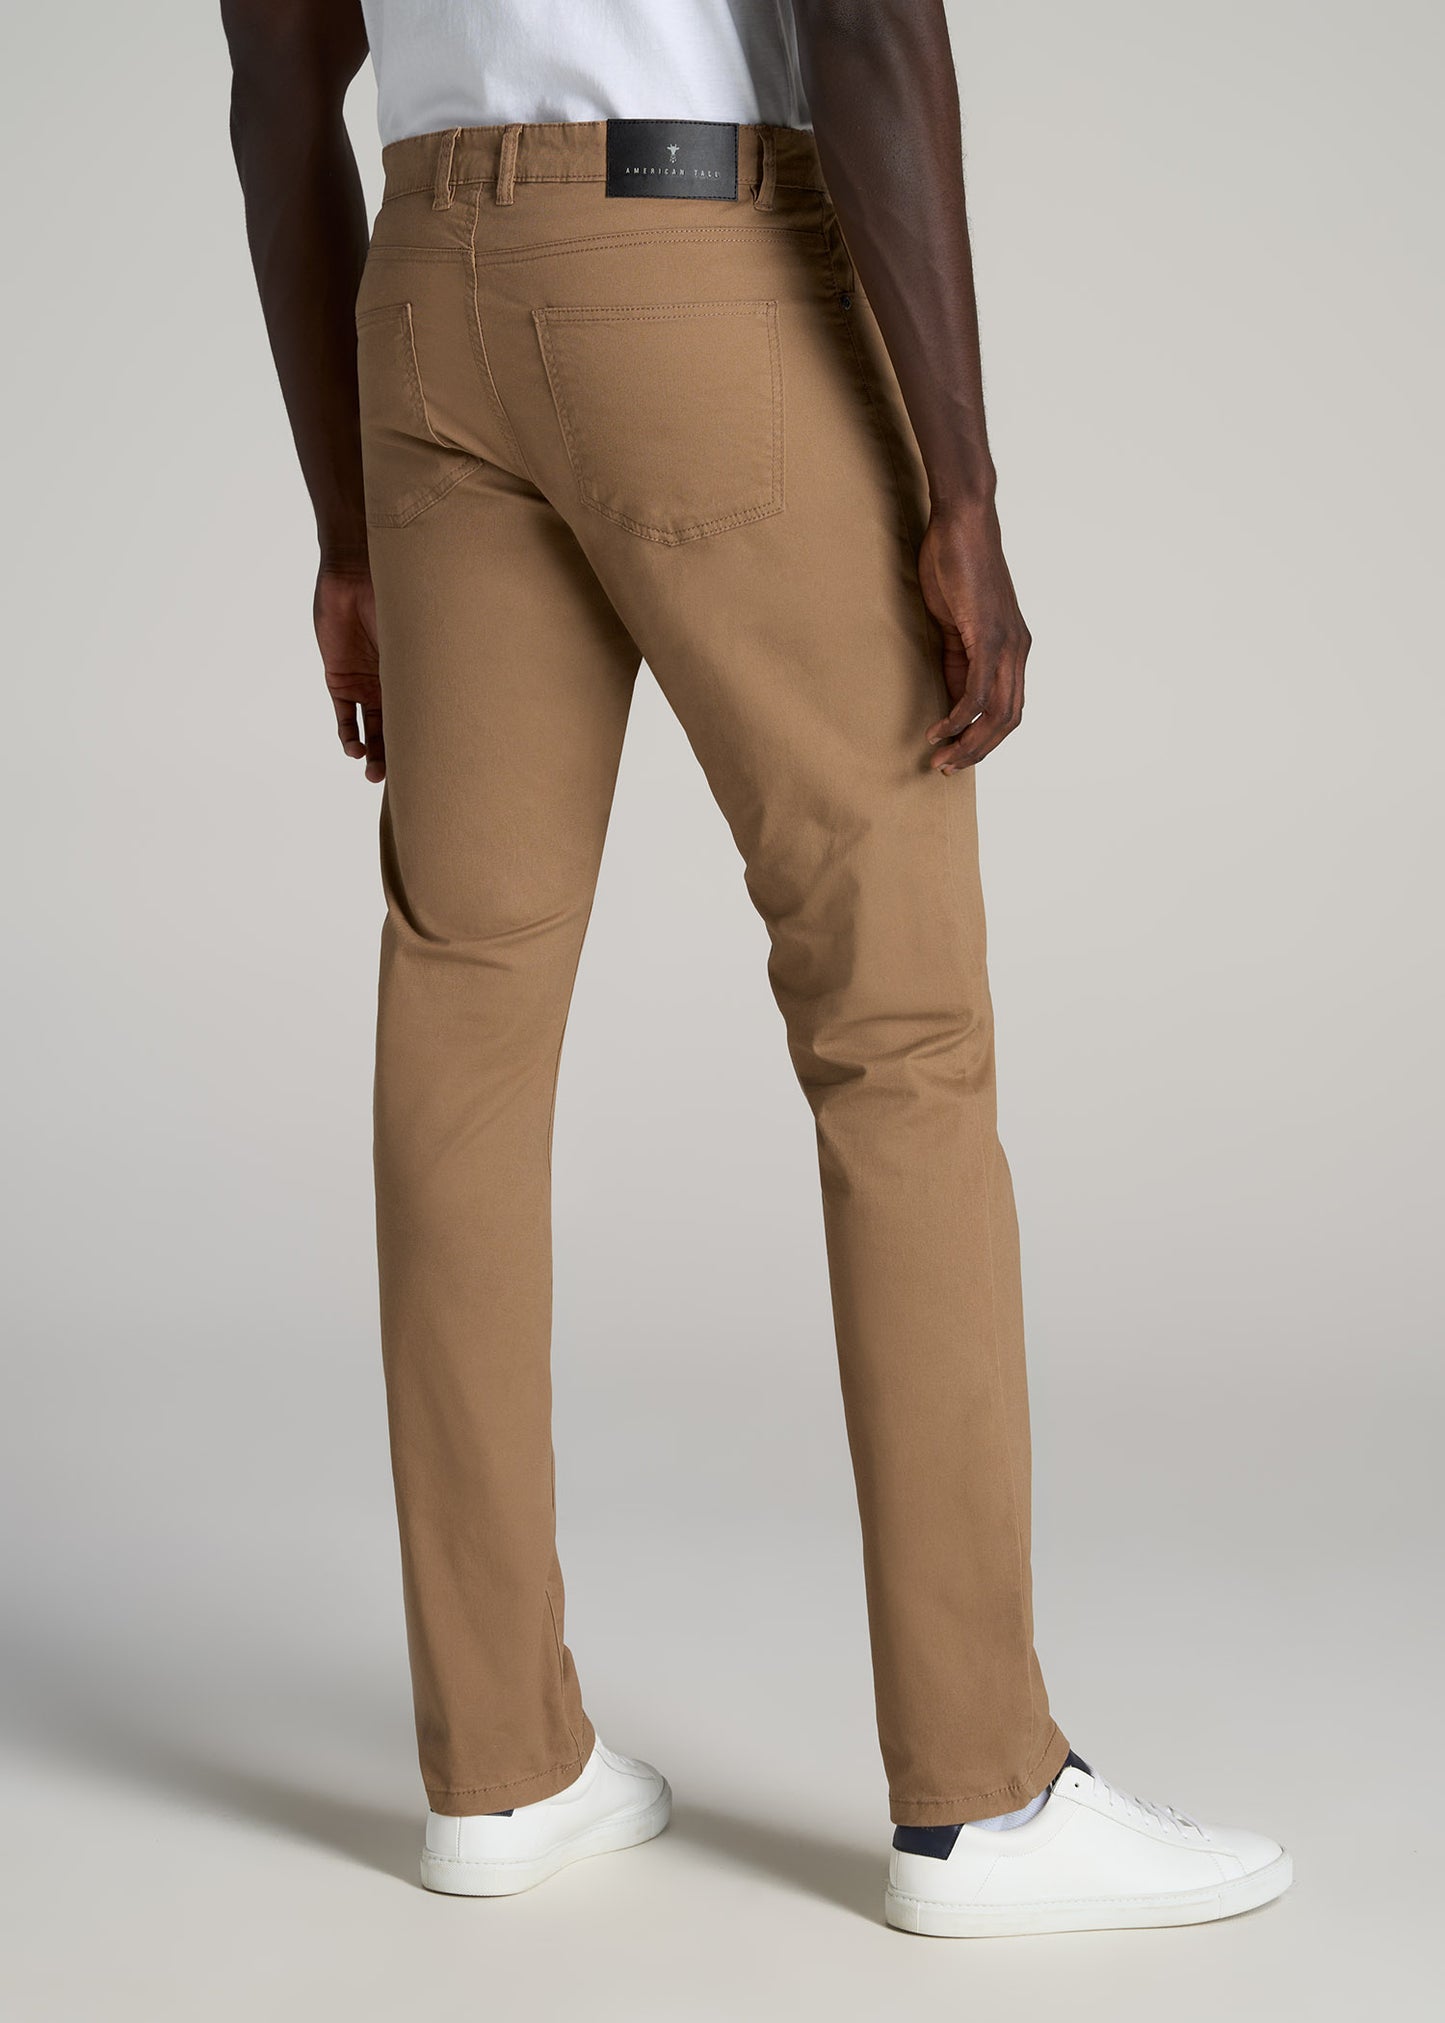 Carman TAPERED Fit Five Pocket Pants for Tall Men in Pebble Grey